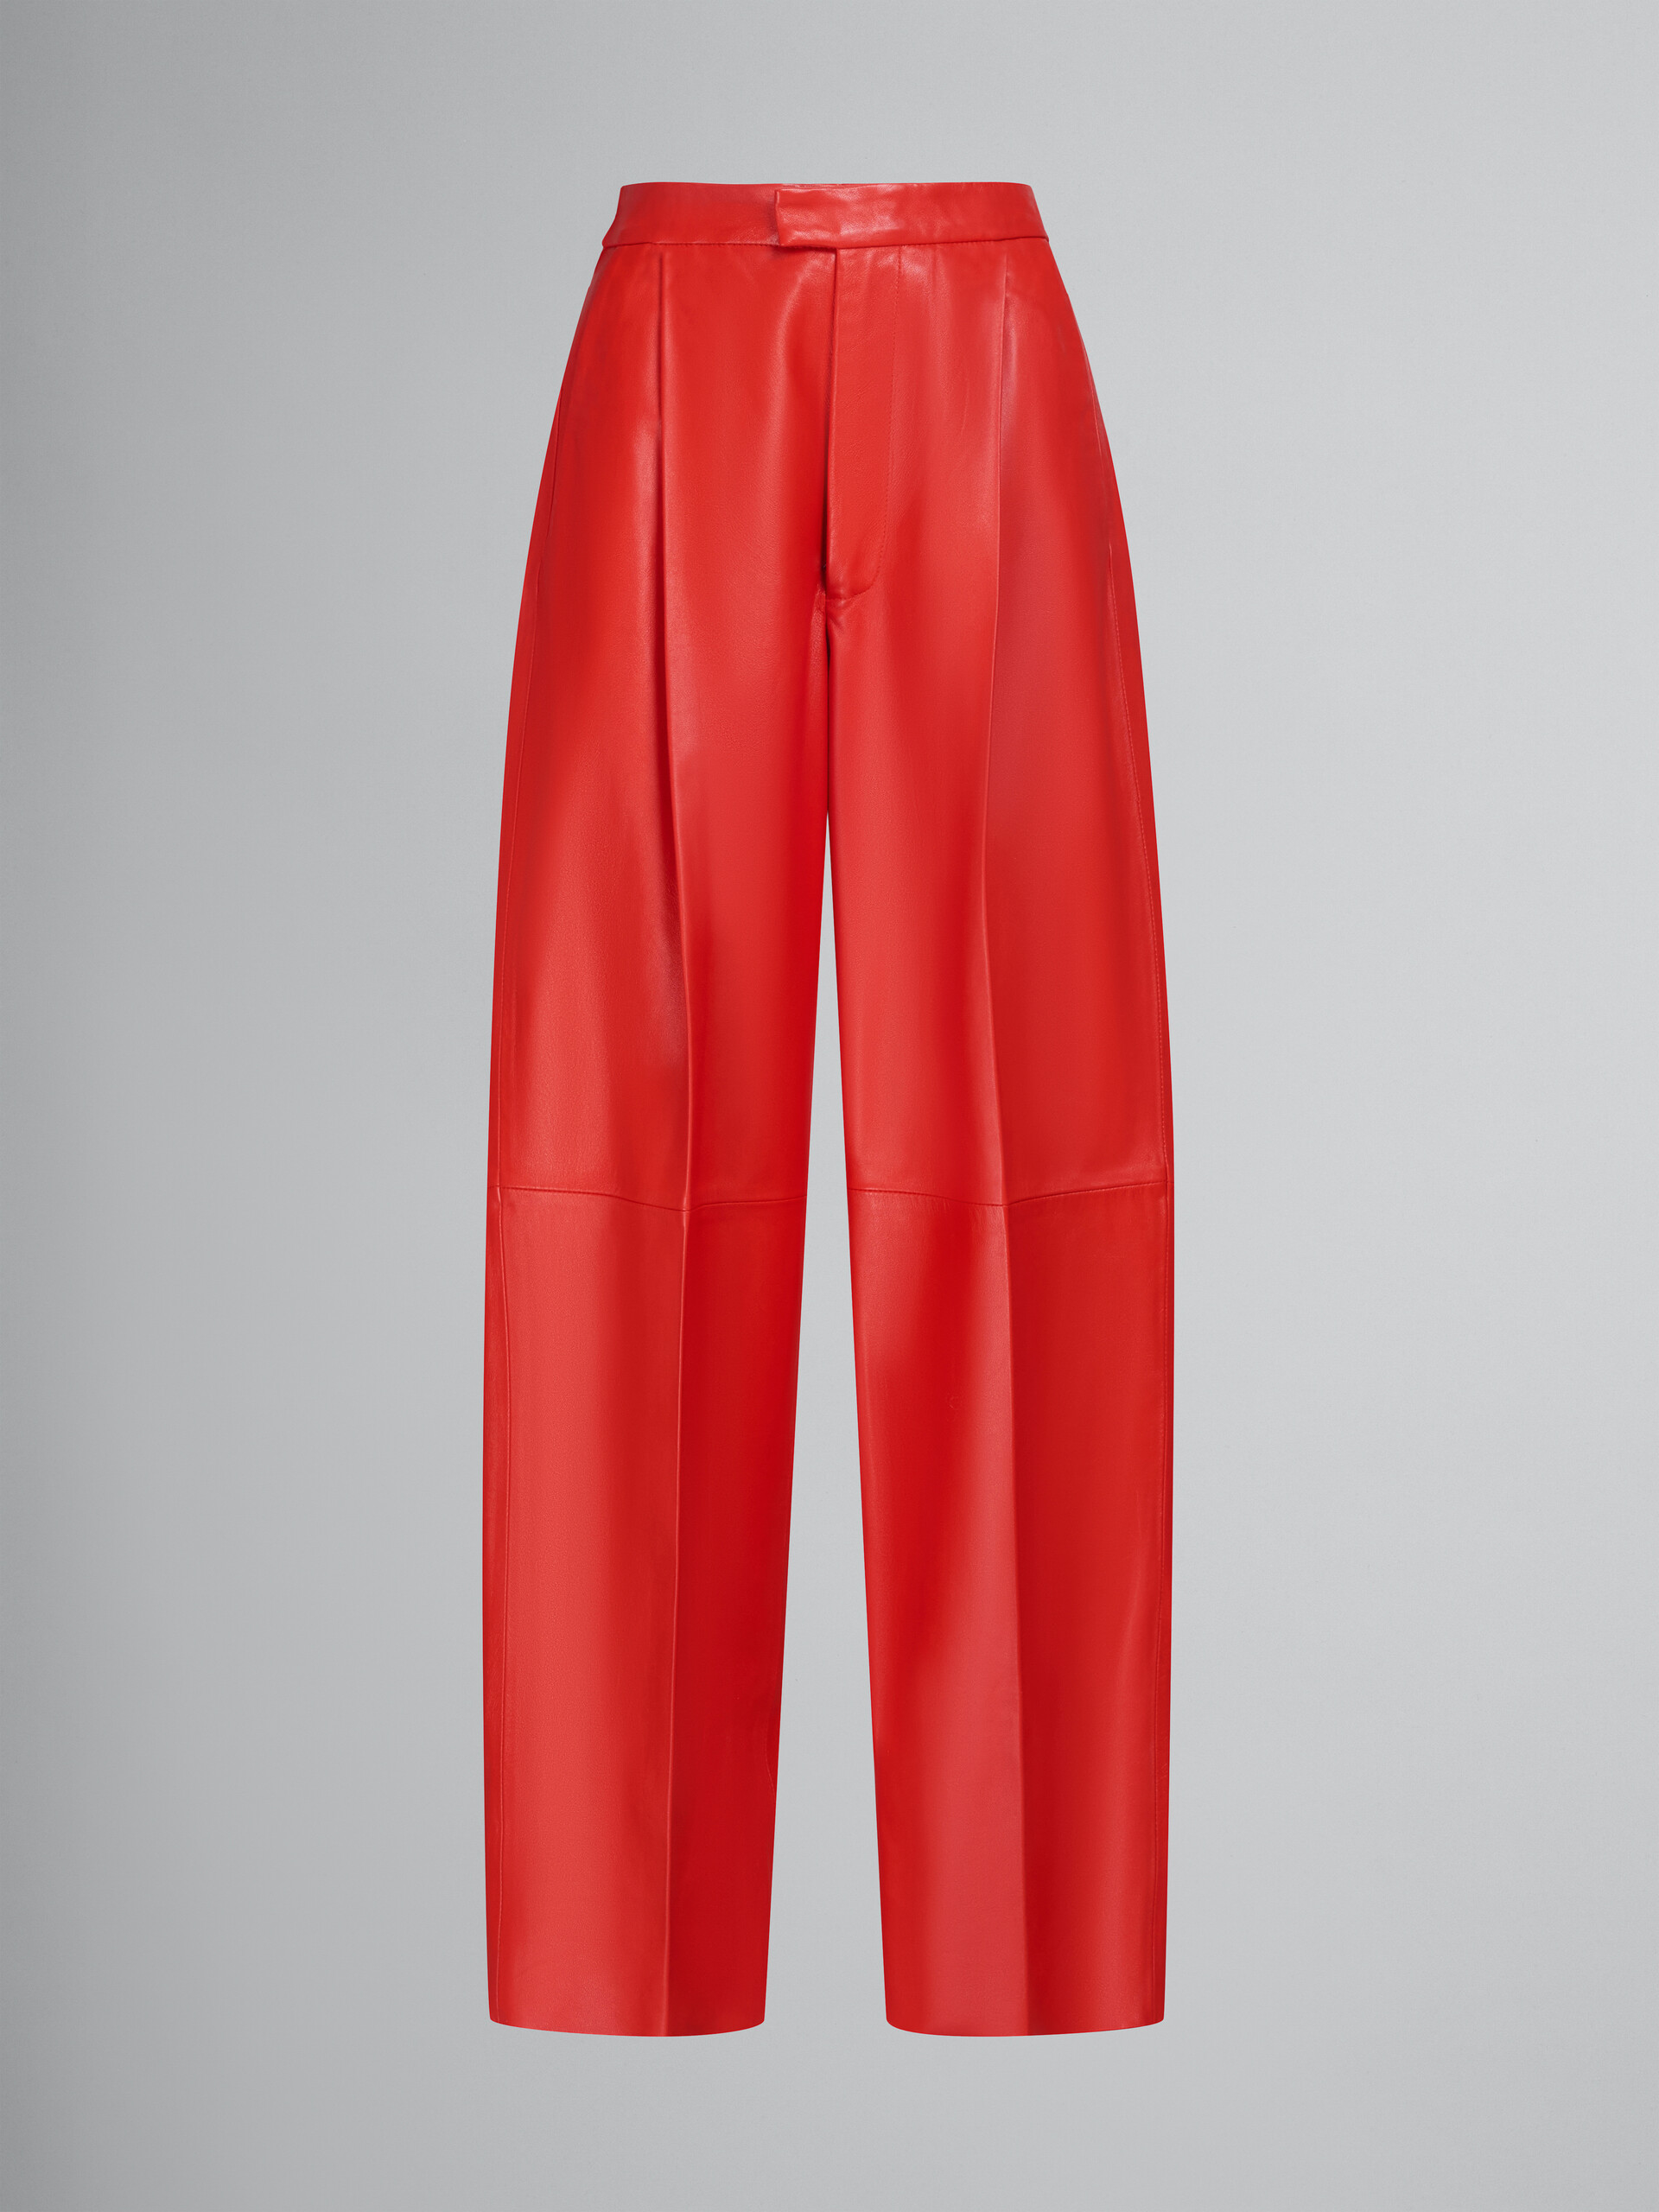 Red nappa leather tailored trousers - Pants - Image 1